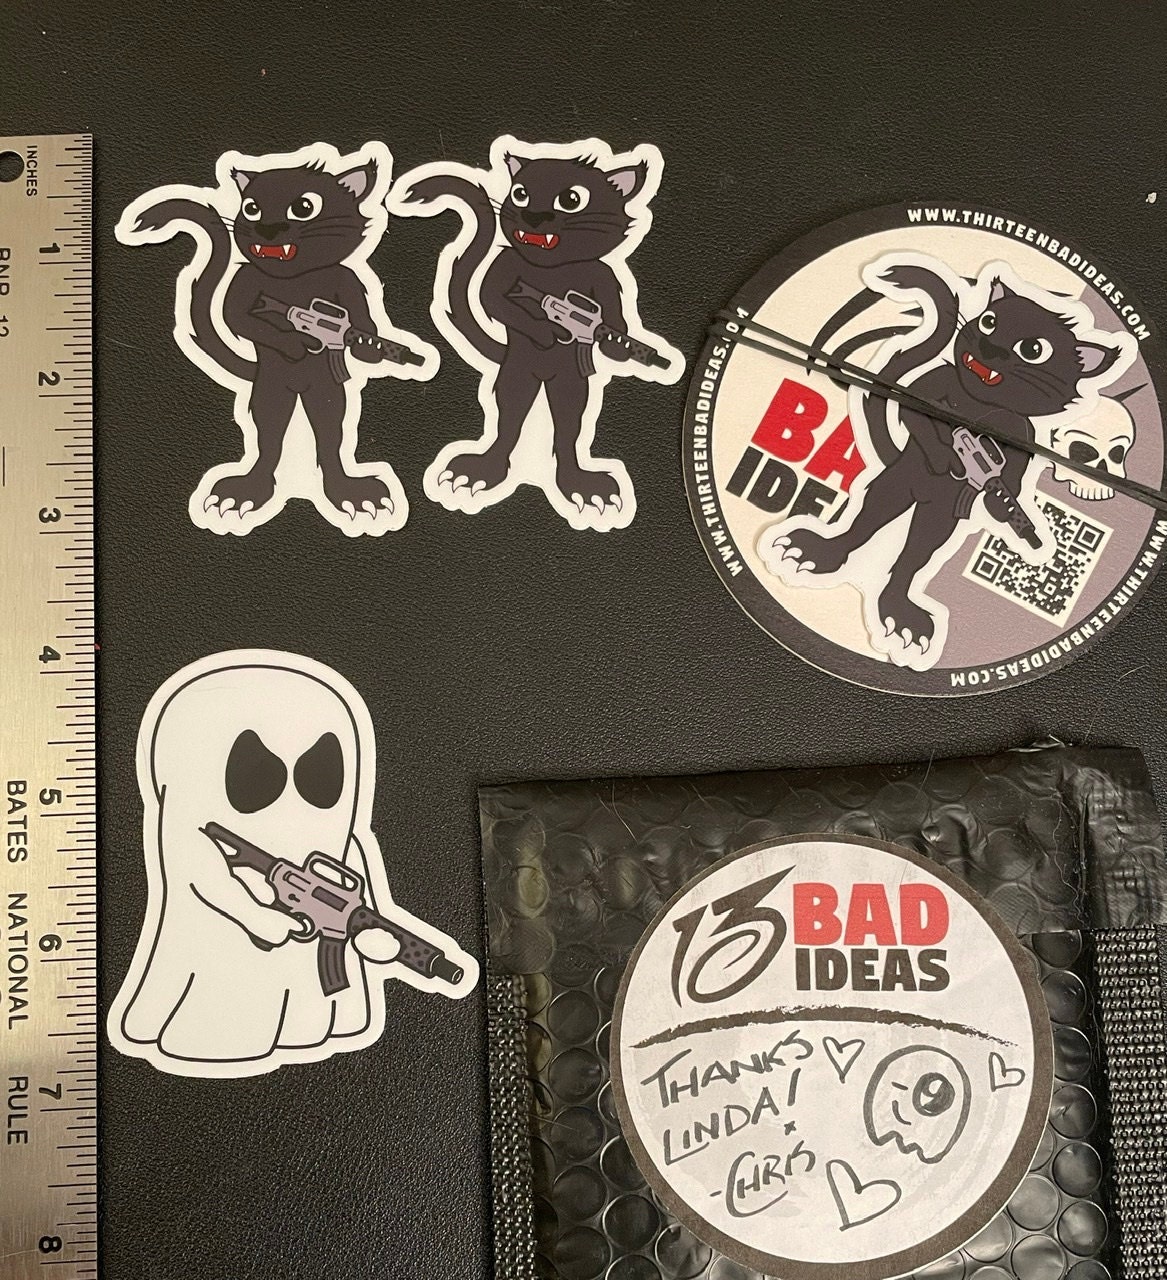 I love cats and I love guns! I appreciate that this shop is able to accommodate my specific interests. The stickers were shipped quickly and well protected and I even received a bonus ghost gun sticker. What’s not to love?!? Thank you Chris!